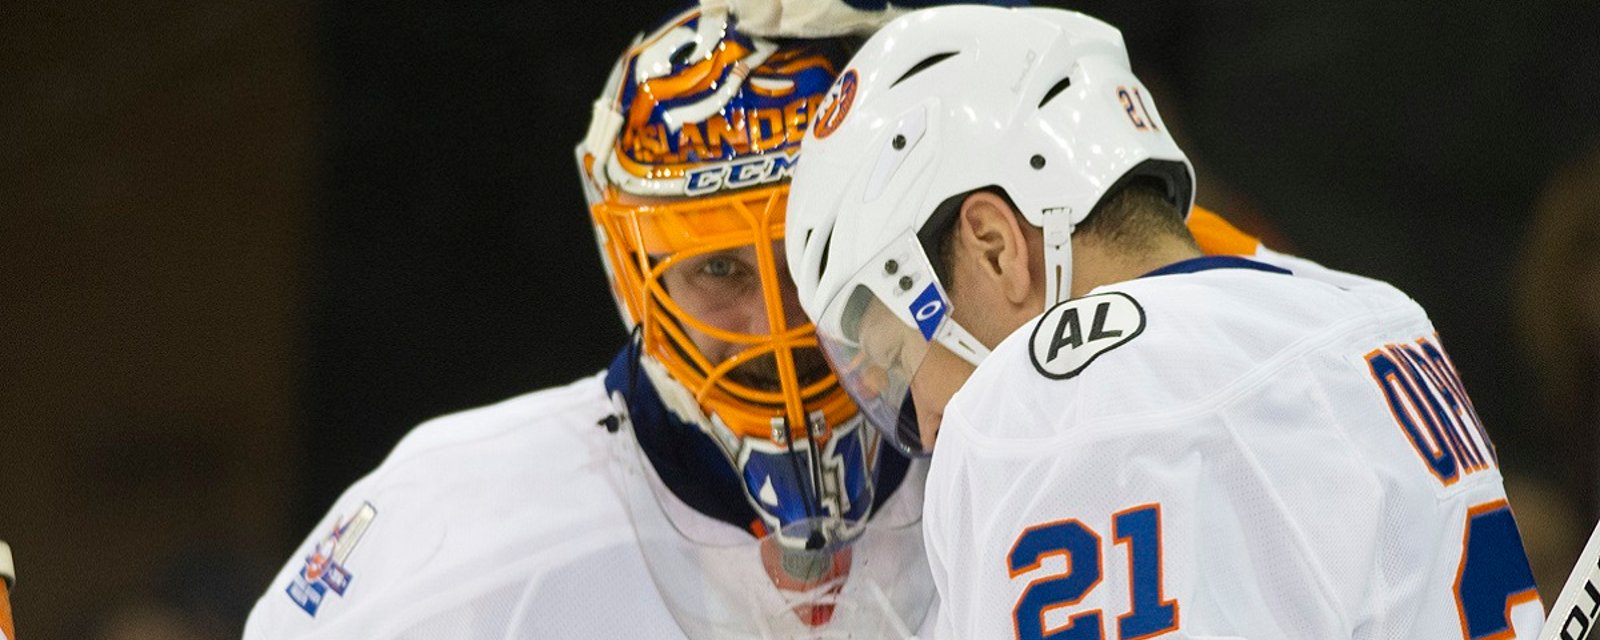 Goalie battle on Team Europe could have major impact in the NHL.